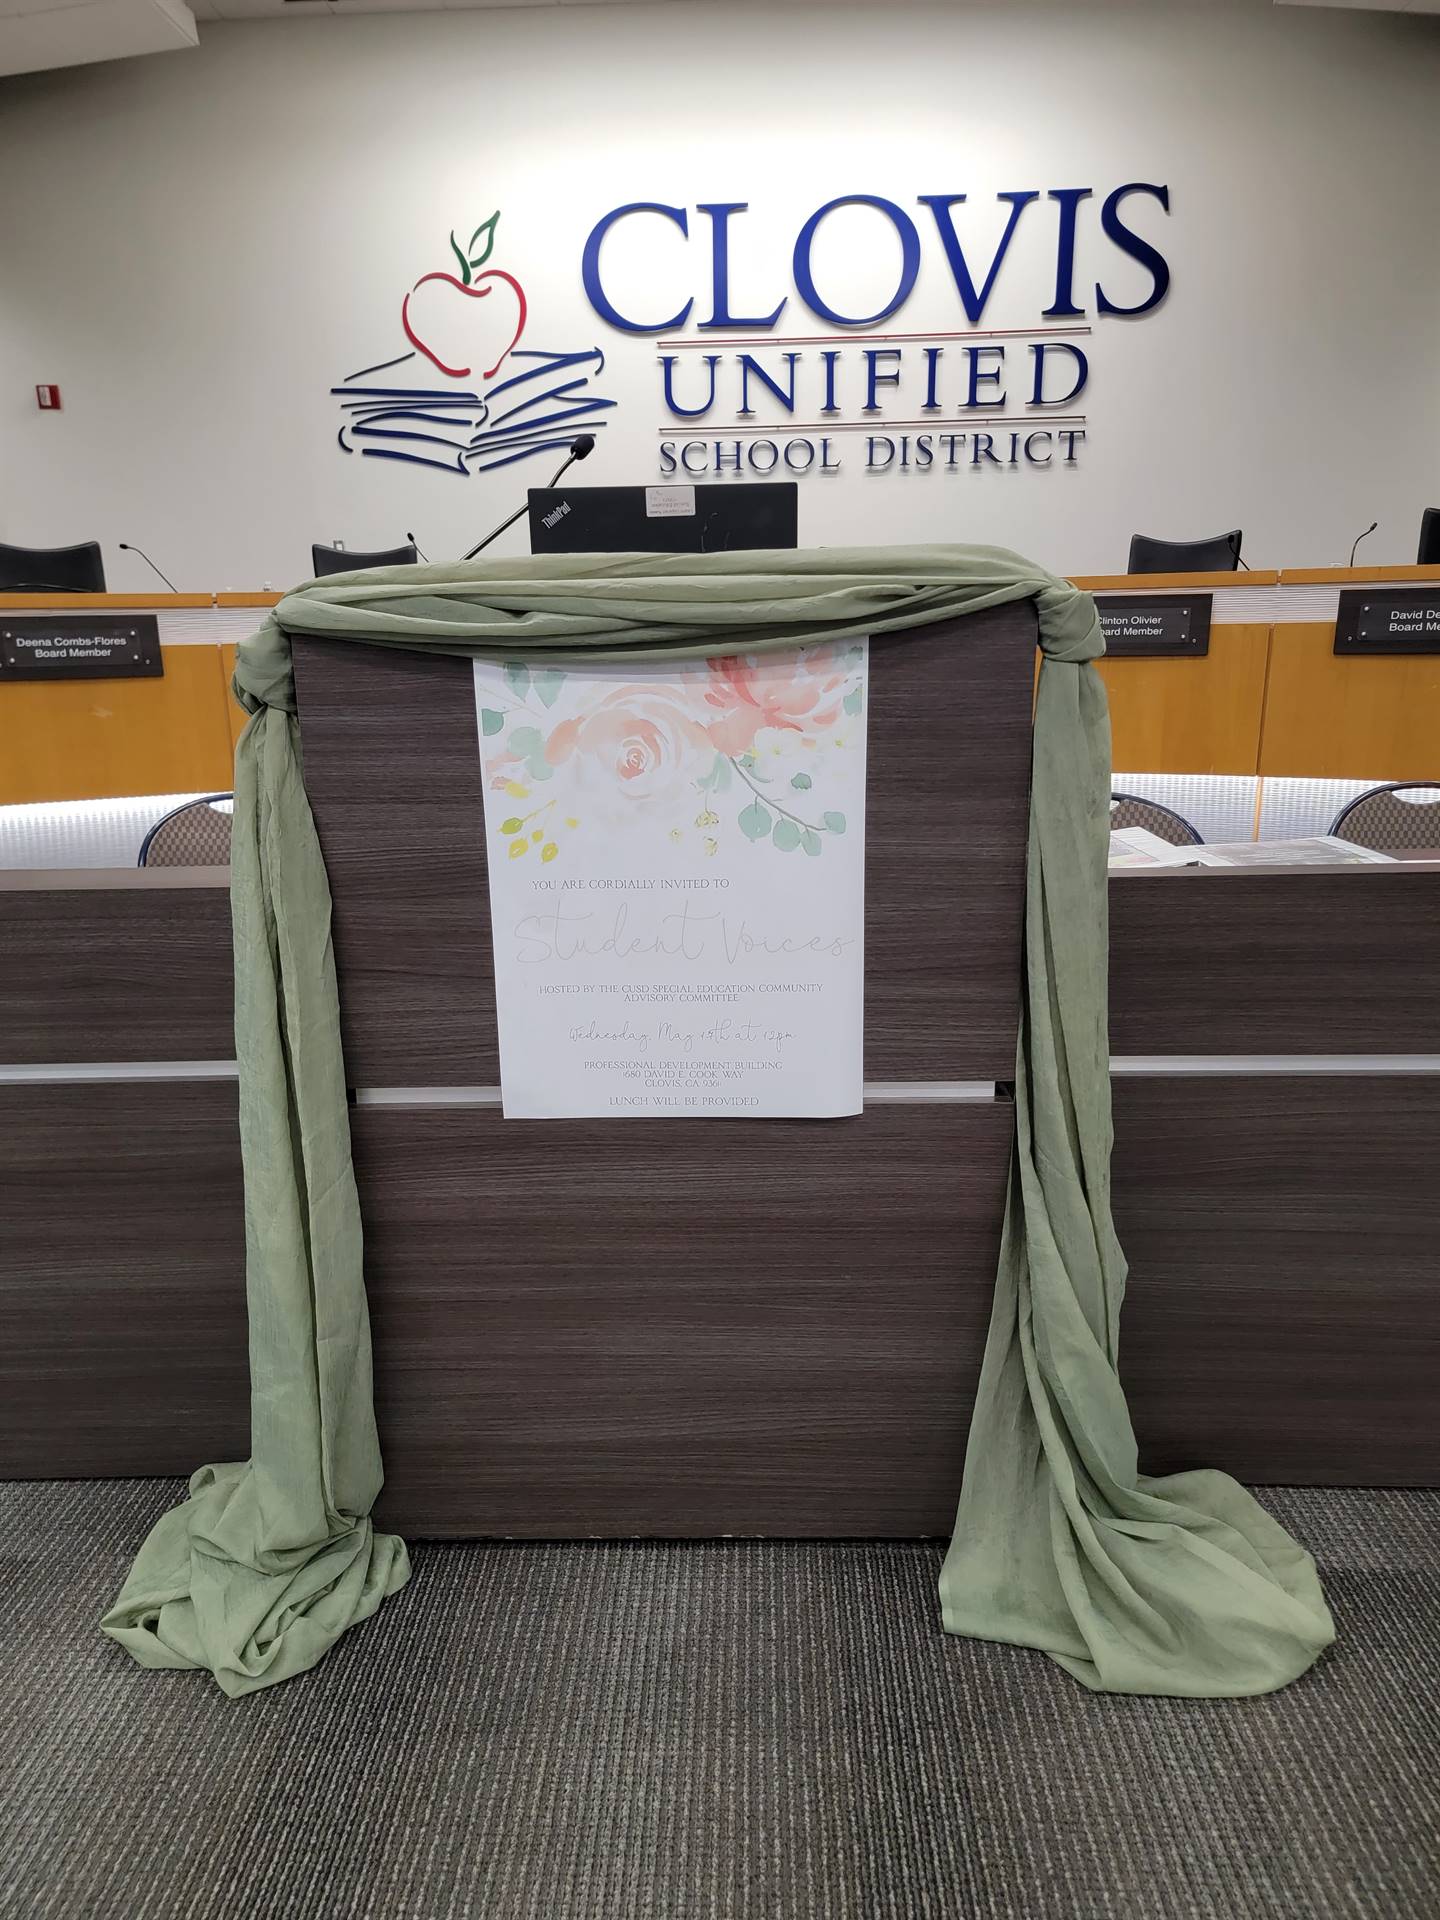 board room podium decorated wtih green runner and student voices sign